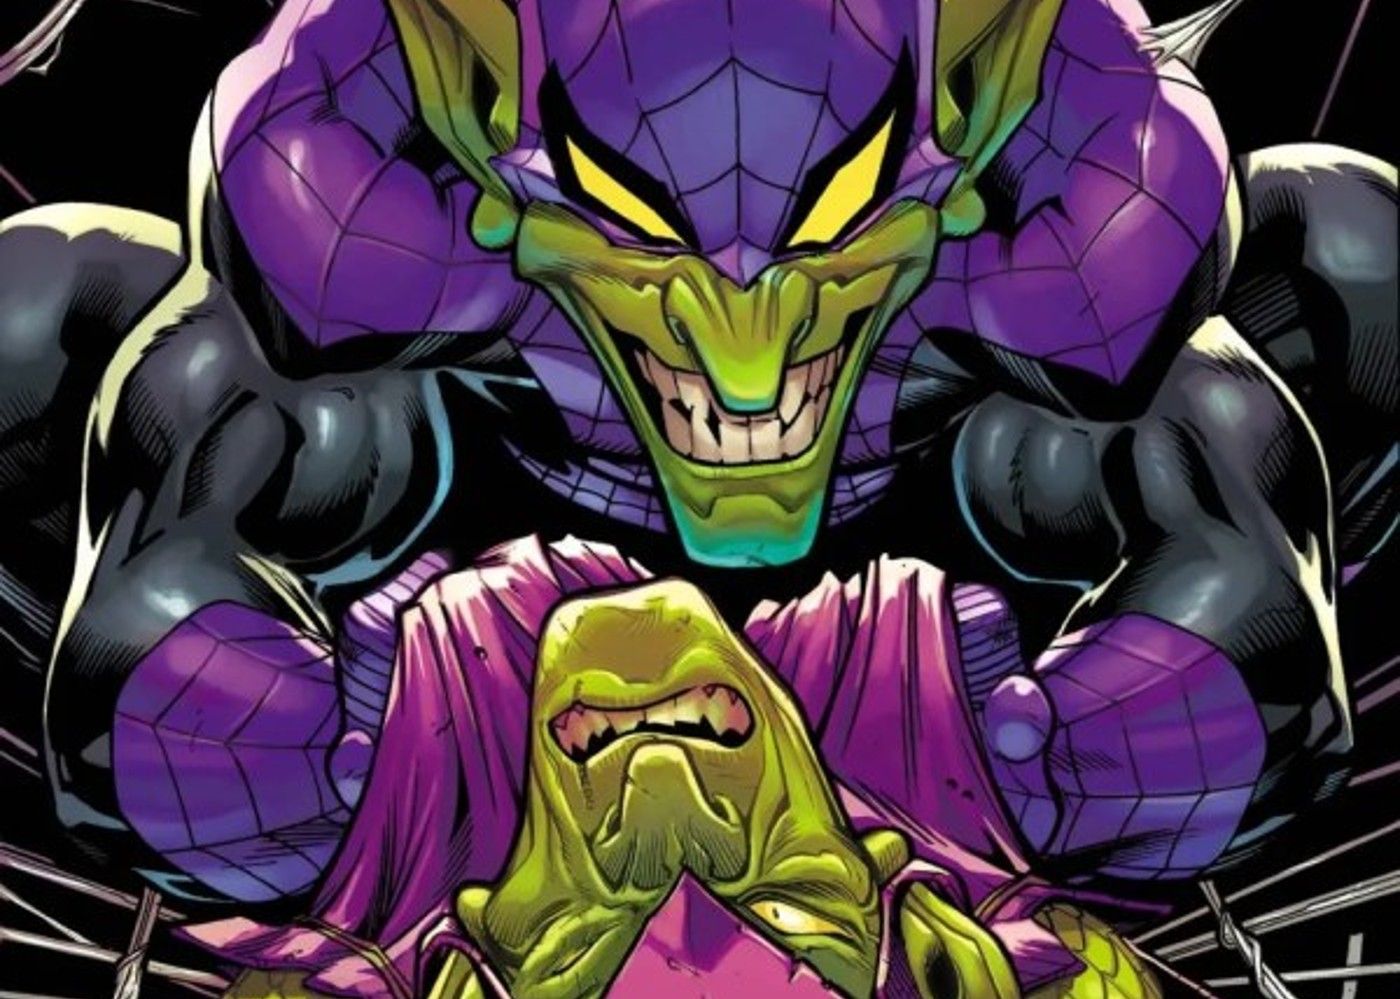 peter parker as the spider-goblin in spider-man